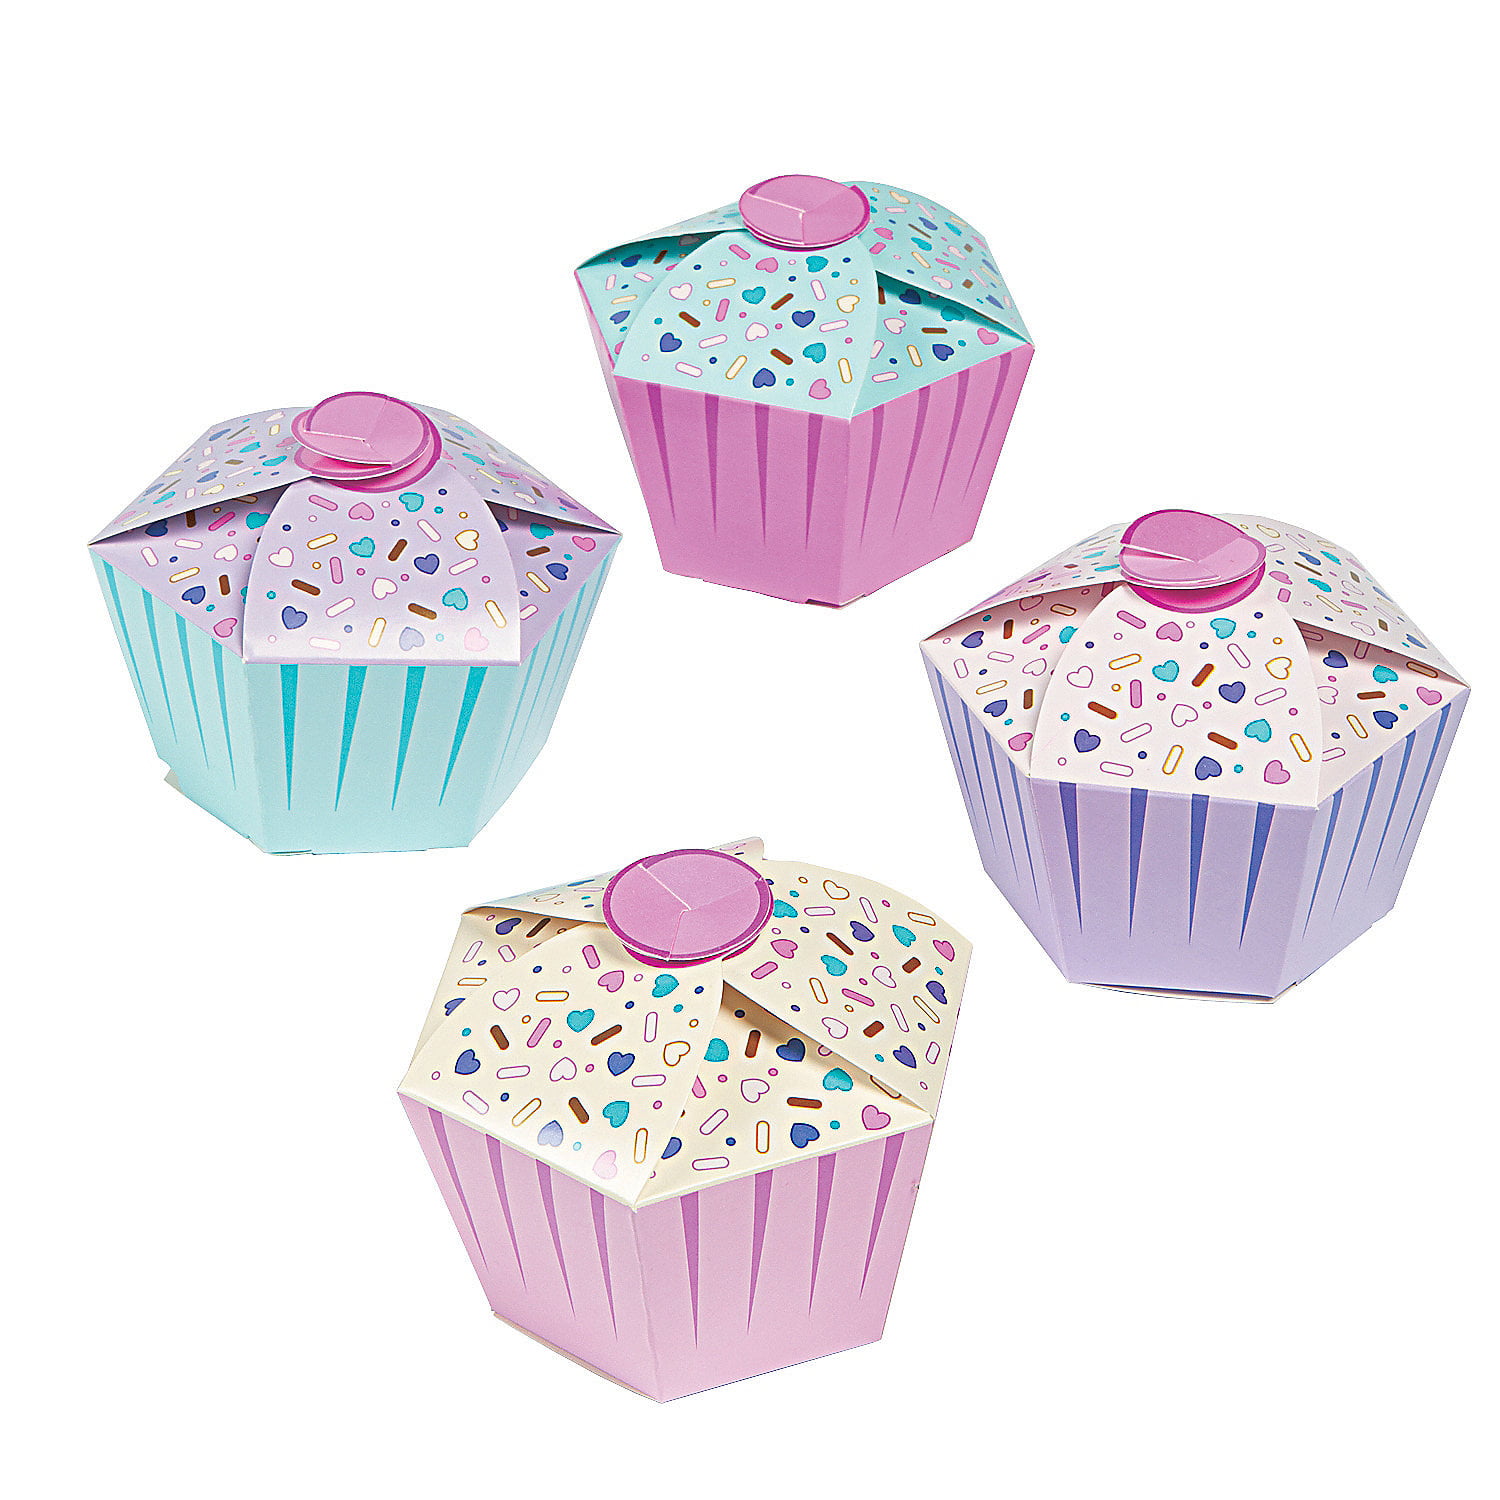 SMALL Purple Treat Boxes Wedding Confetti Favour Loot Gift Party Cupcake Box 